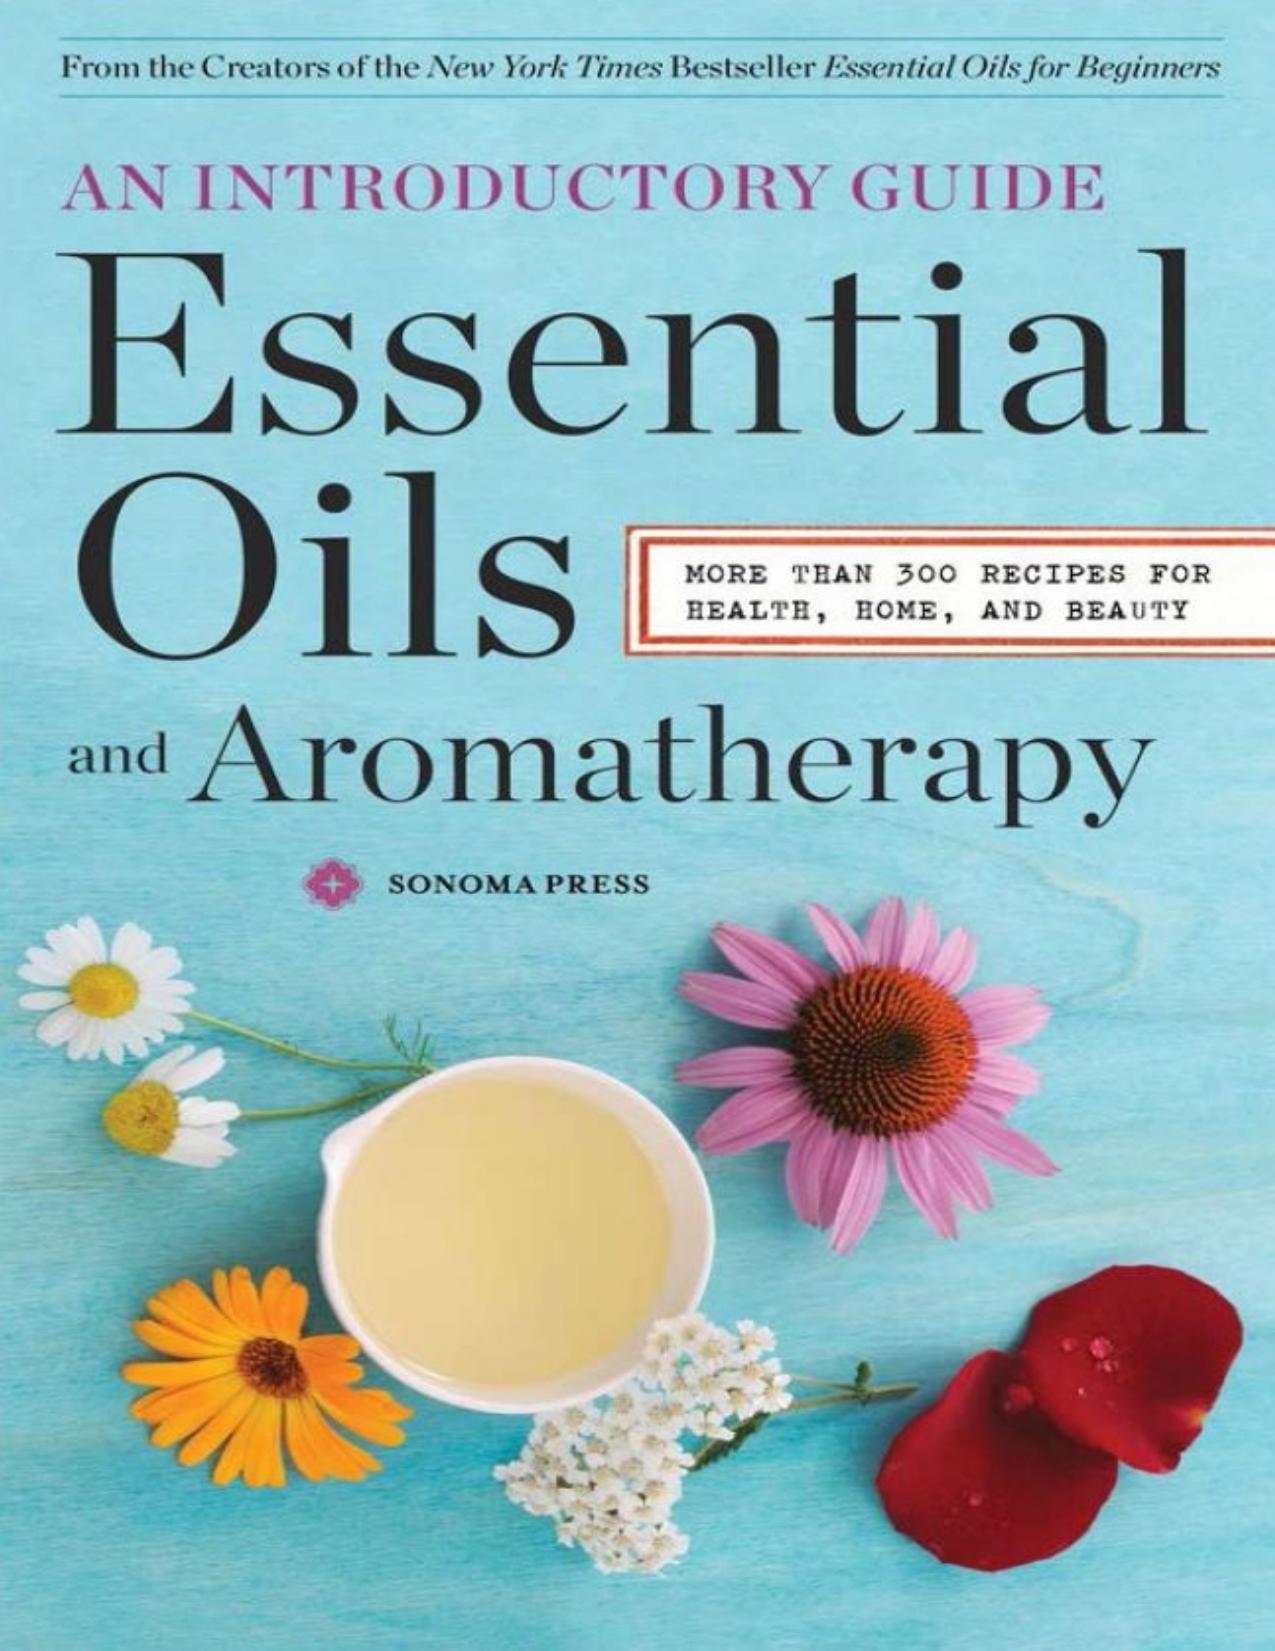 Essential Oils & Aromatherapy, An Introductory Guide: More Than 300 Recipes for Health, Home and Beauty by Unknown